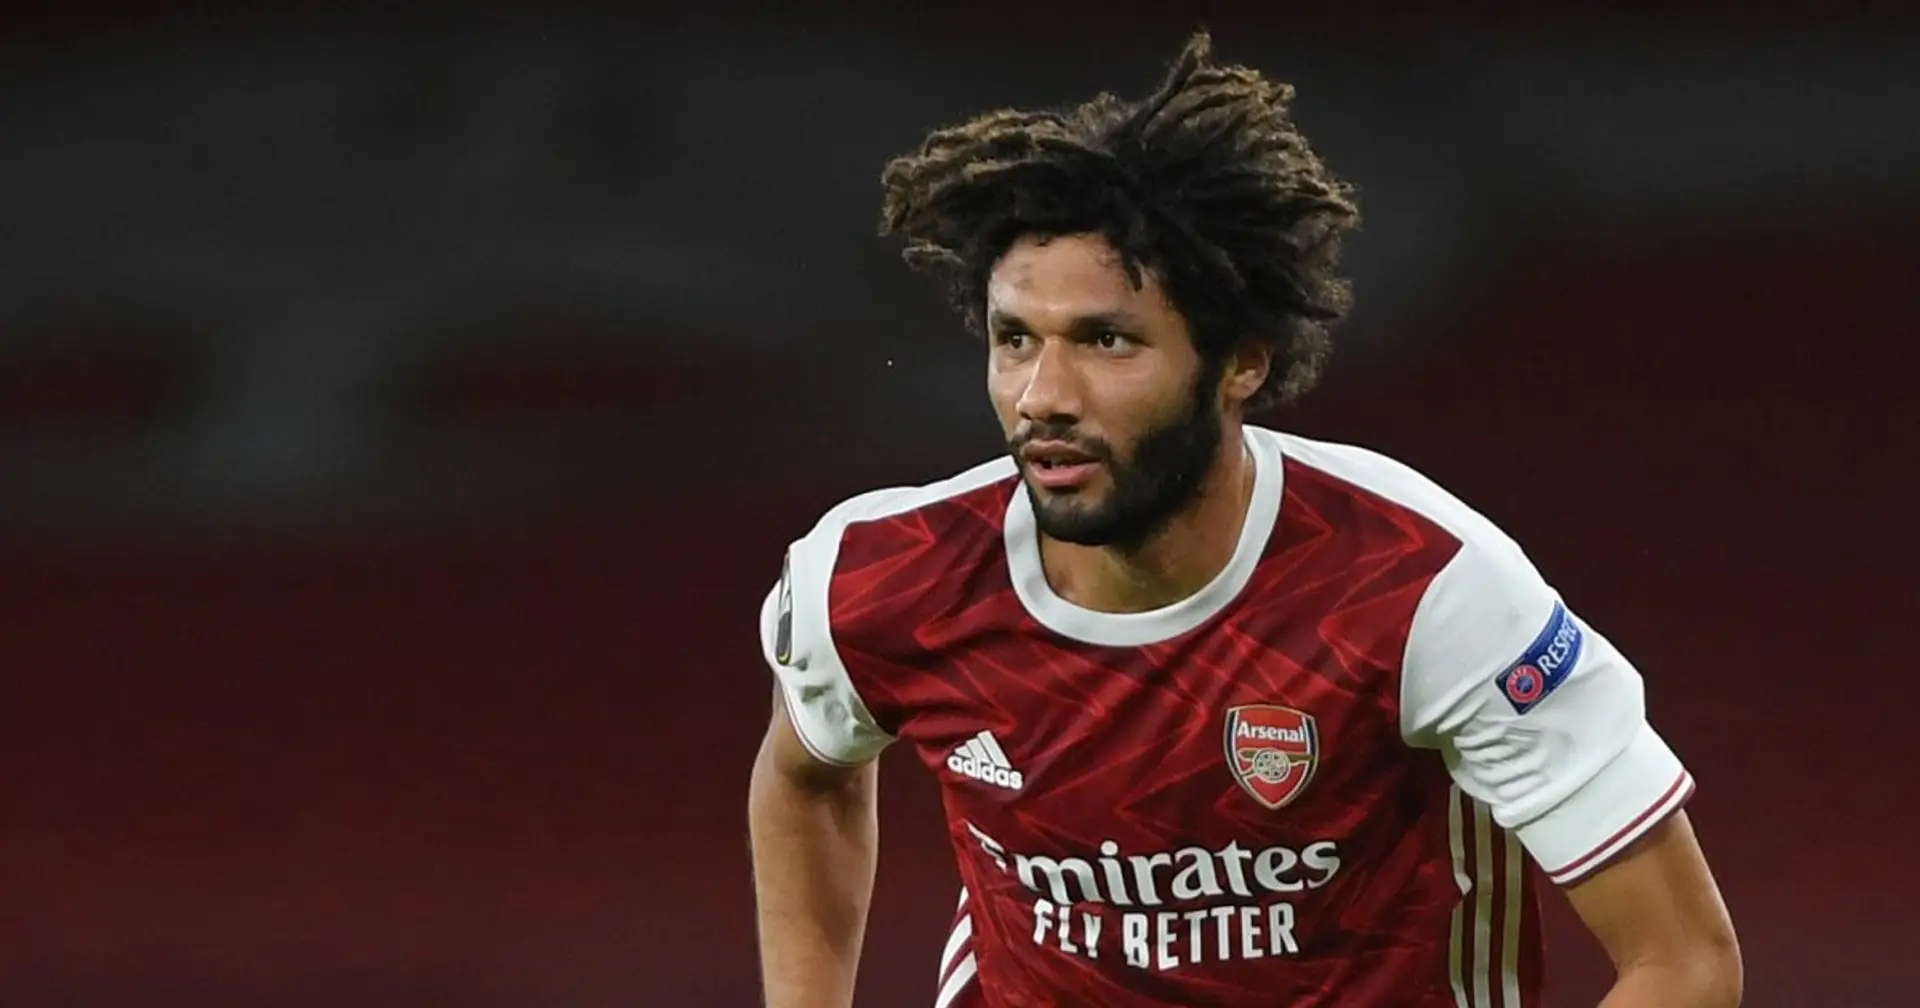 'He believed in himself and ended up a key player for Arsenal': Villa's Trezeguet hails 'hardworking' Elneny